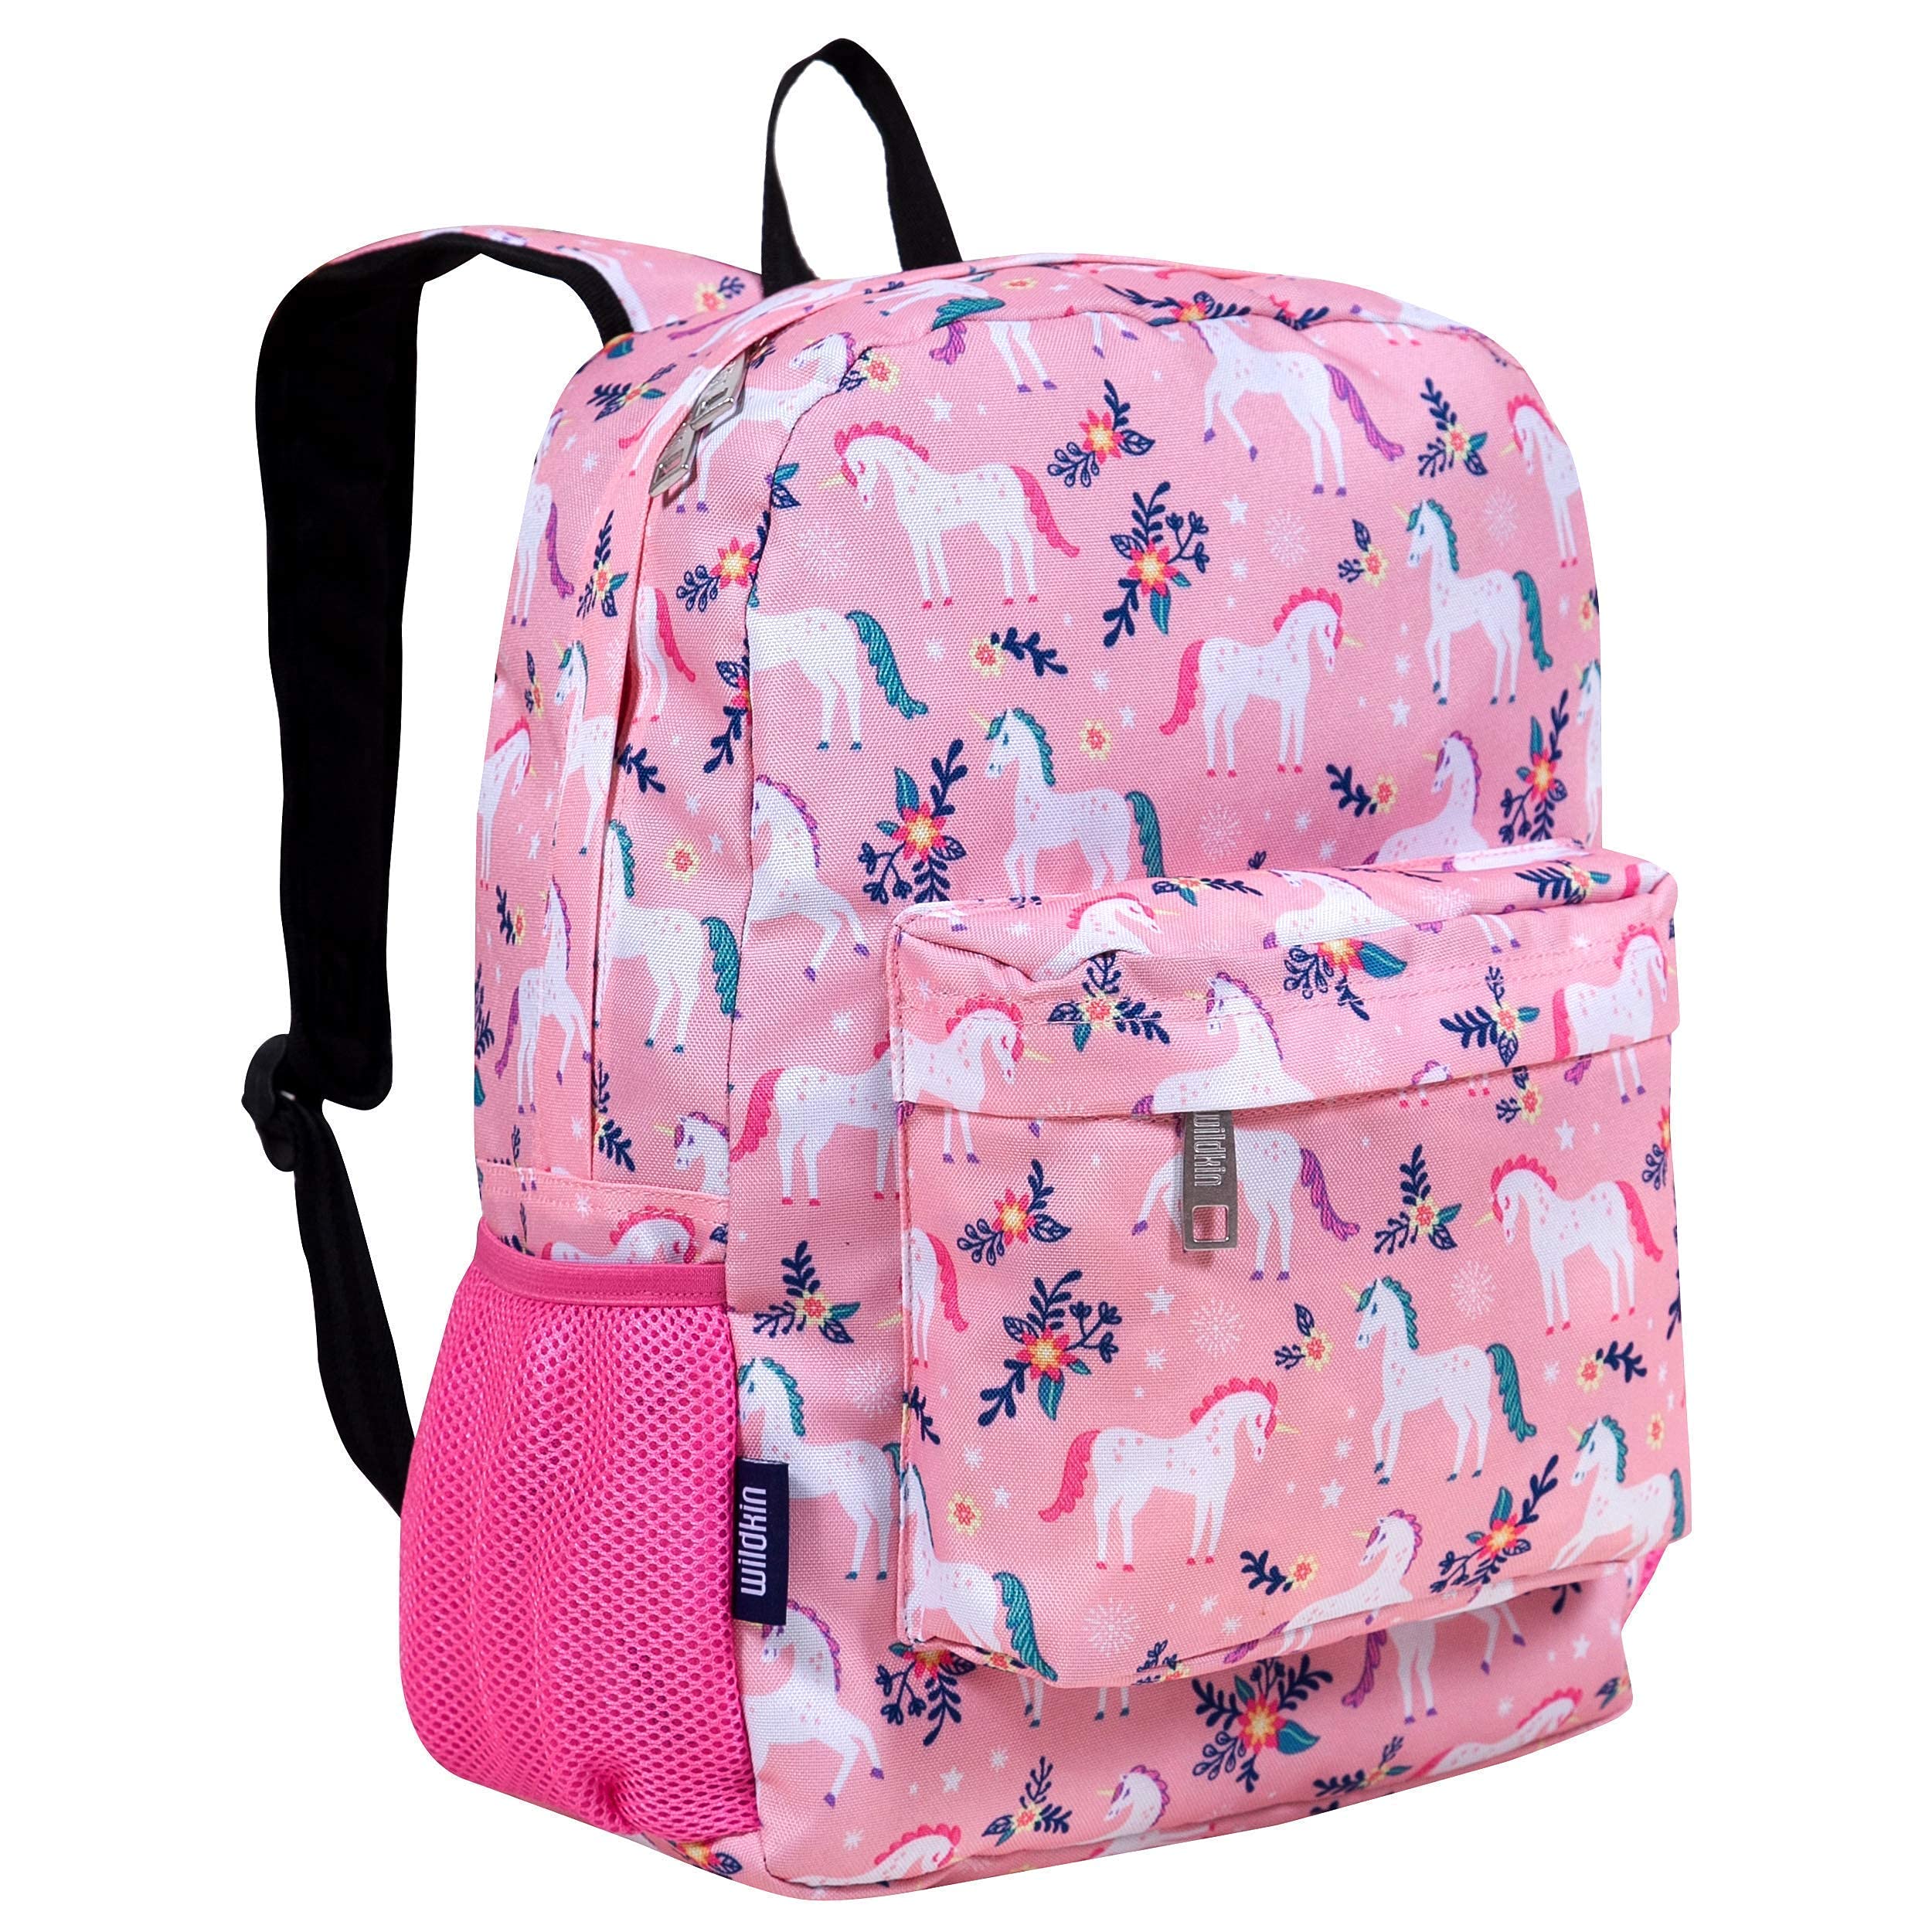 Wildkin 16 Inch Backpack Bundle with 2 Compartment Lunch Bag (Magical Unicorns)